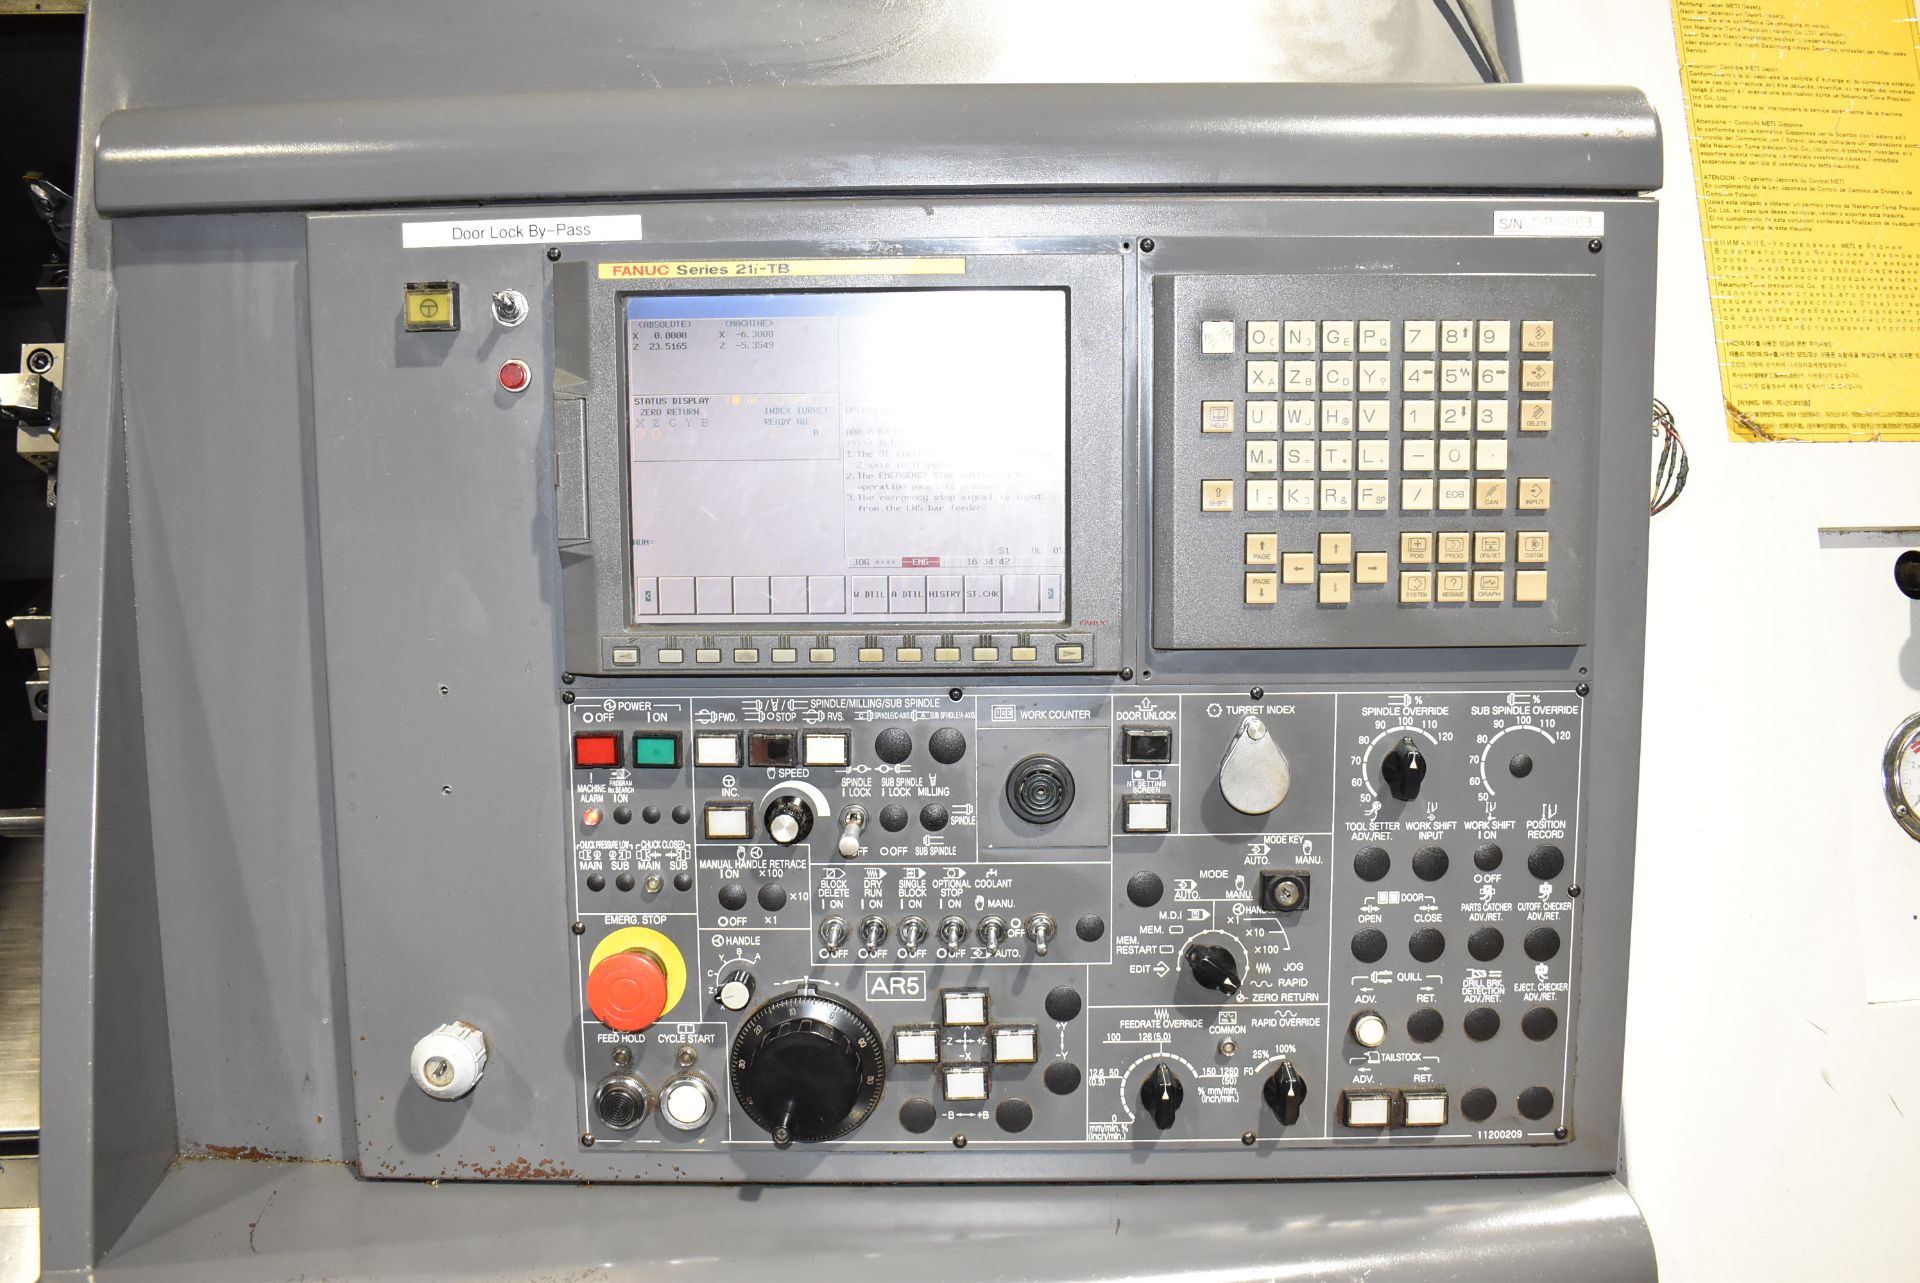 NAKAMURA-TOME (2009) SC-450 CNC TURNING CENTER WITH FANUC SERIES 21I-TB CNC CONTROL, 31.88" SWING - Image 5 of 13